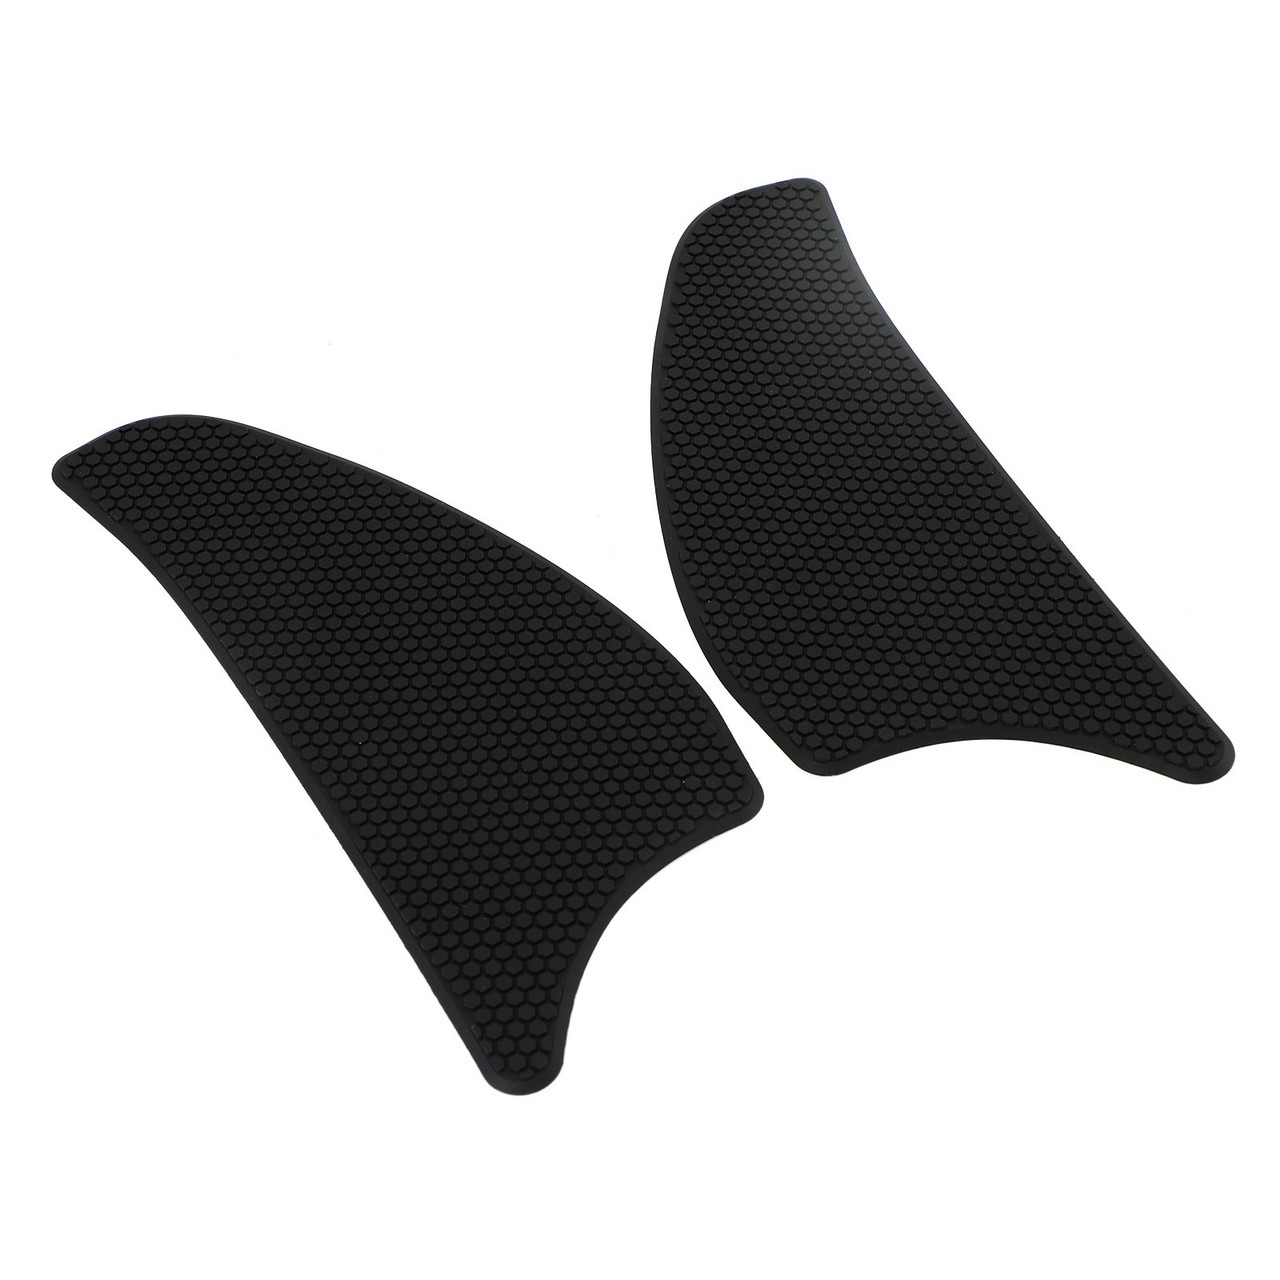 2x Side Tank Traction Grips Pads Fit for Kawasaki Versys 1000 KLZ1000 15-19 Black